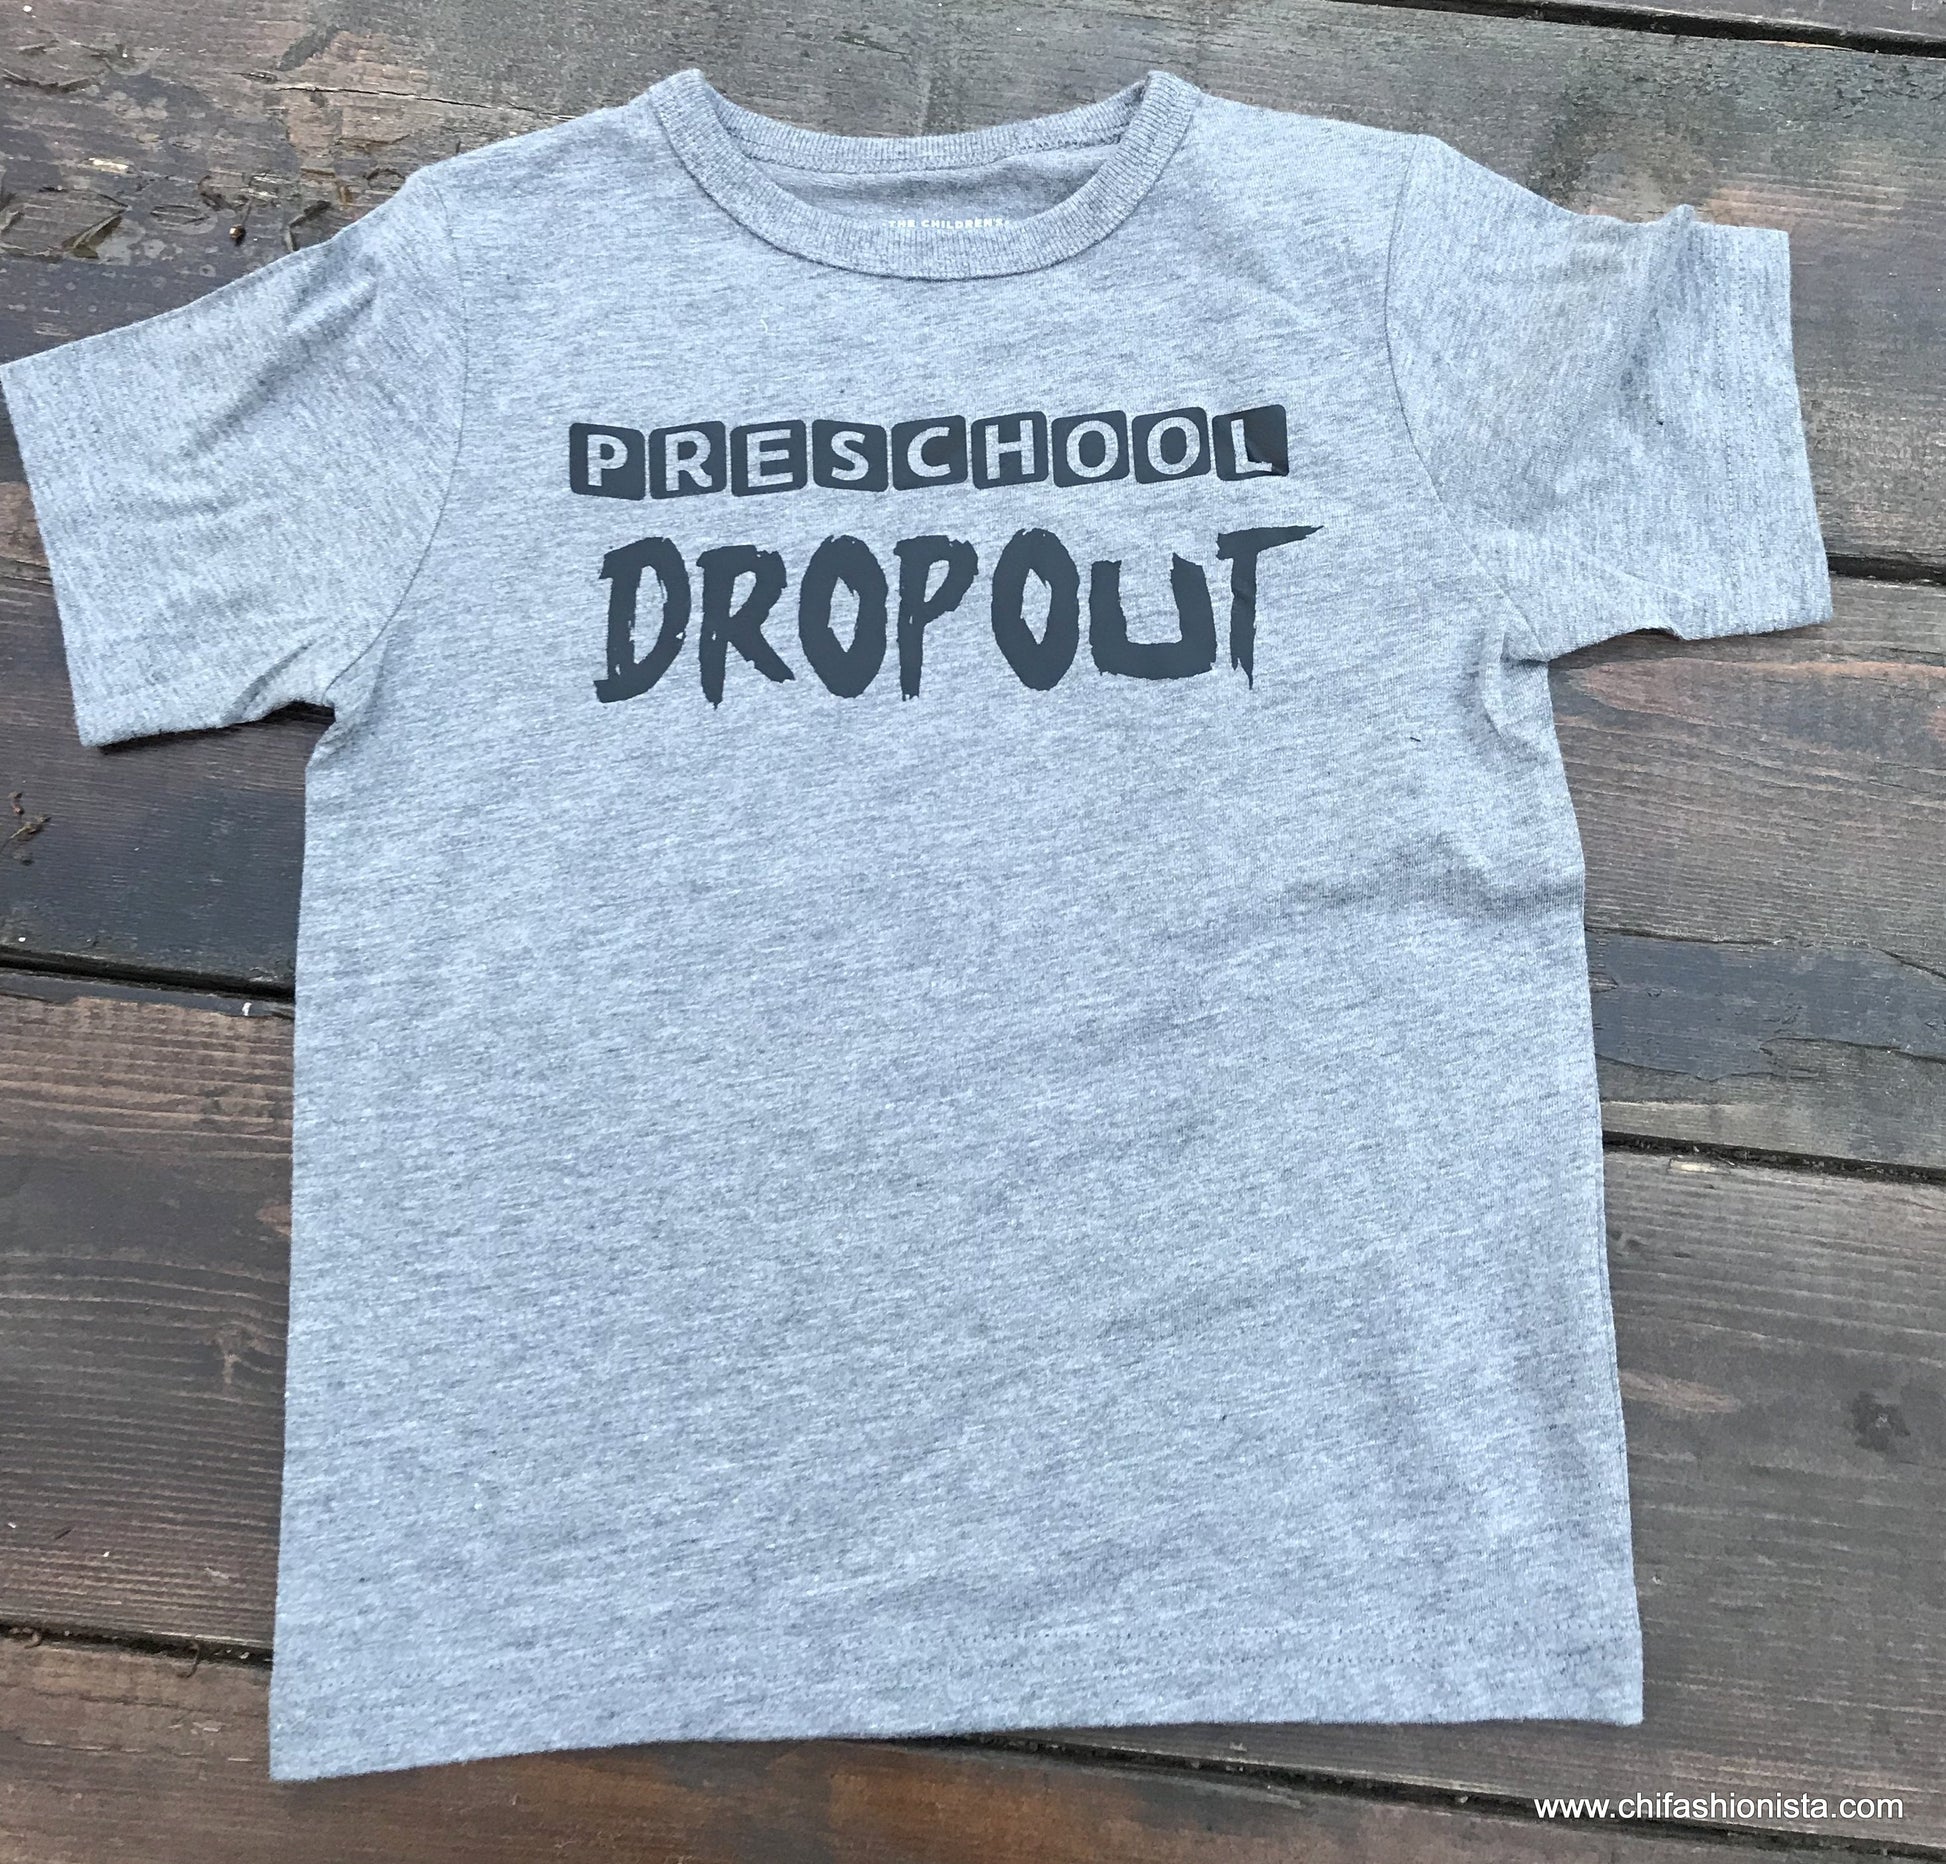 Handcrafted Children's Clothing, Clothing for Children and Parents, Preschool Dropout Shirt, chi-fashionista